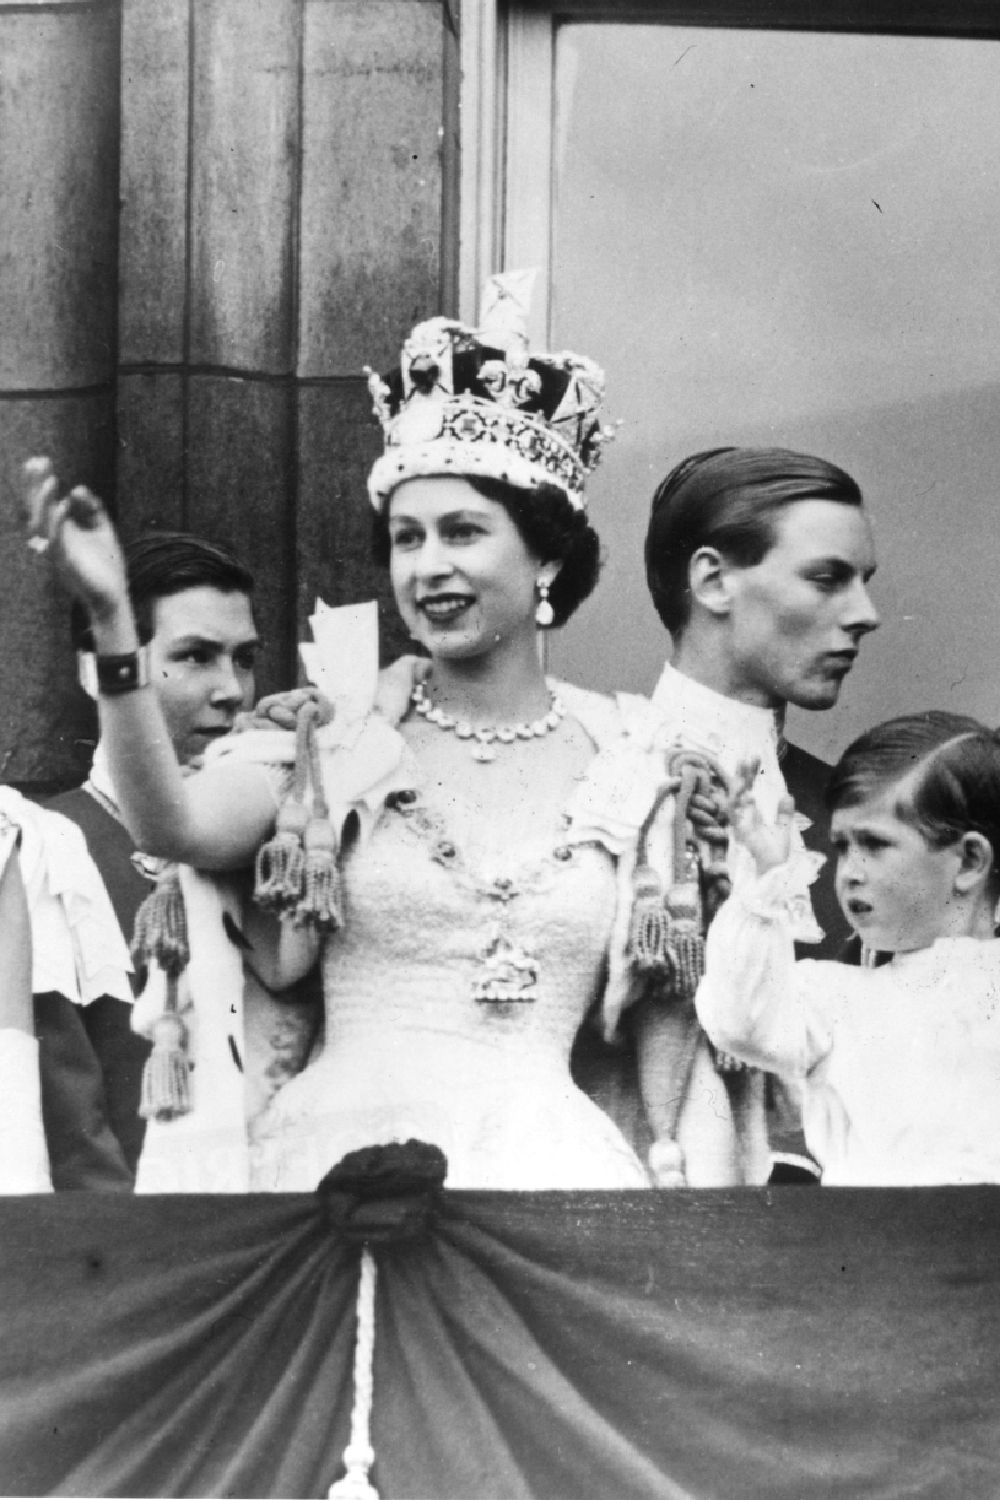 <p>                     The Queen is known to enjoy simple food - and her Coronation day in 1953 was no different. Her Majesty was said to enjoy a traditional menu of soup, steak and salad, followed by ice cream.                   </p>